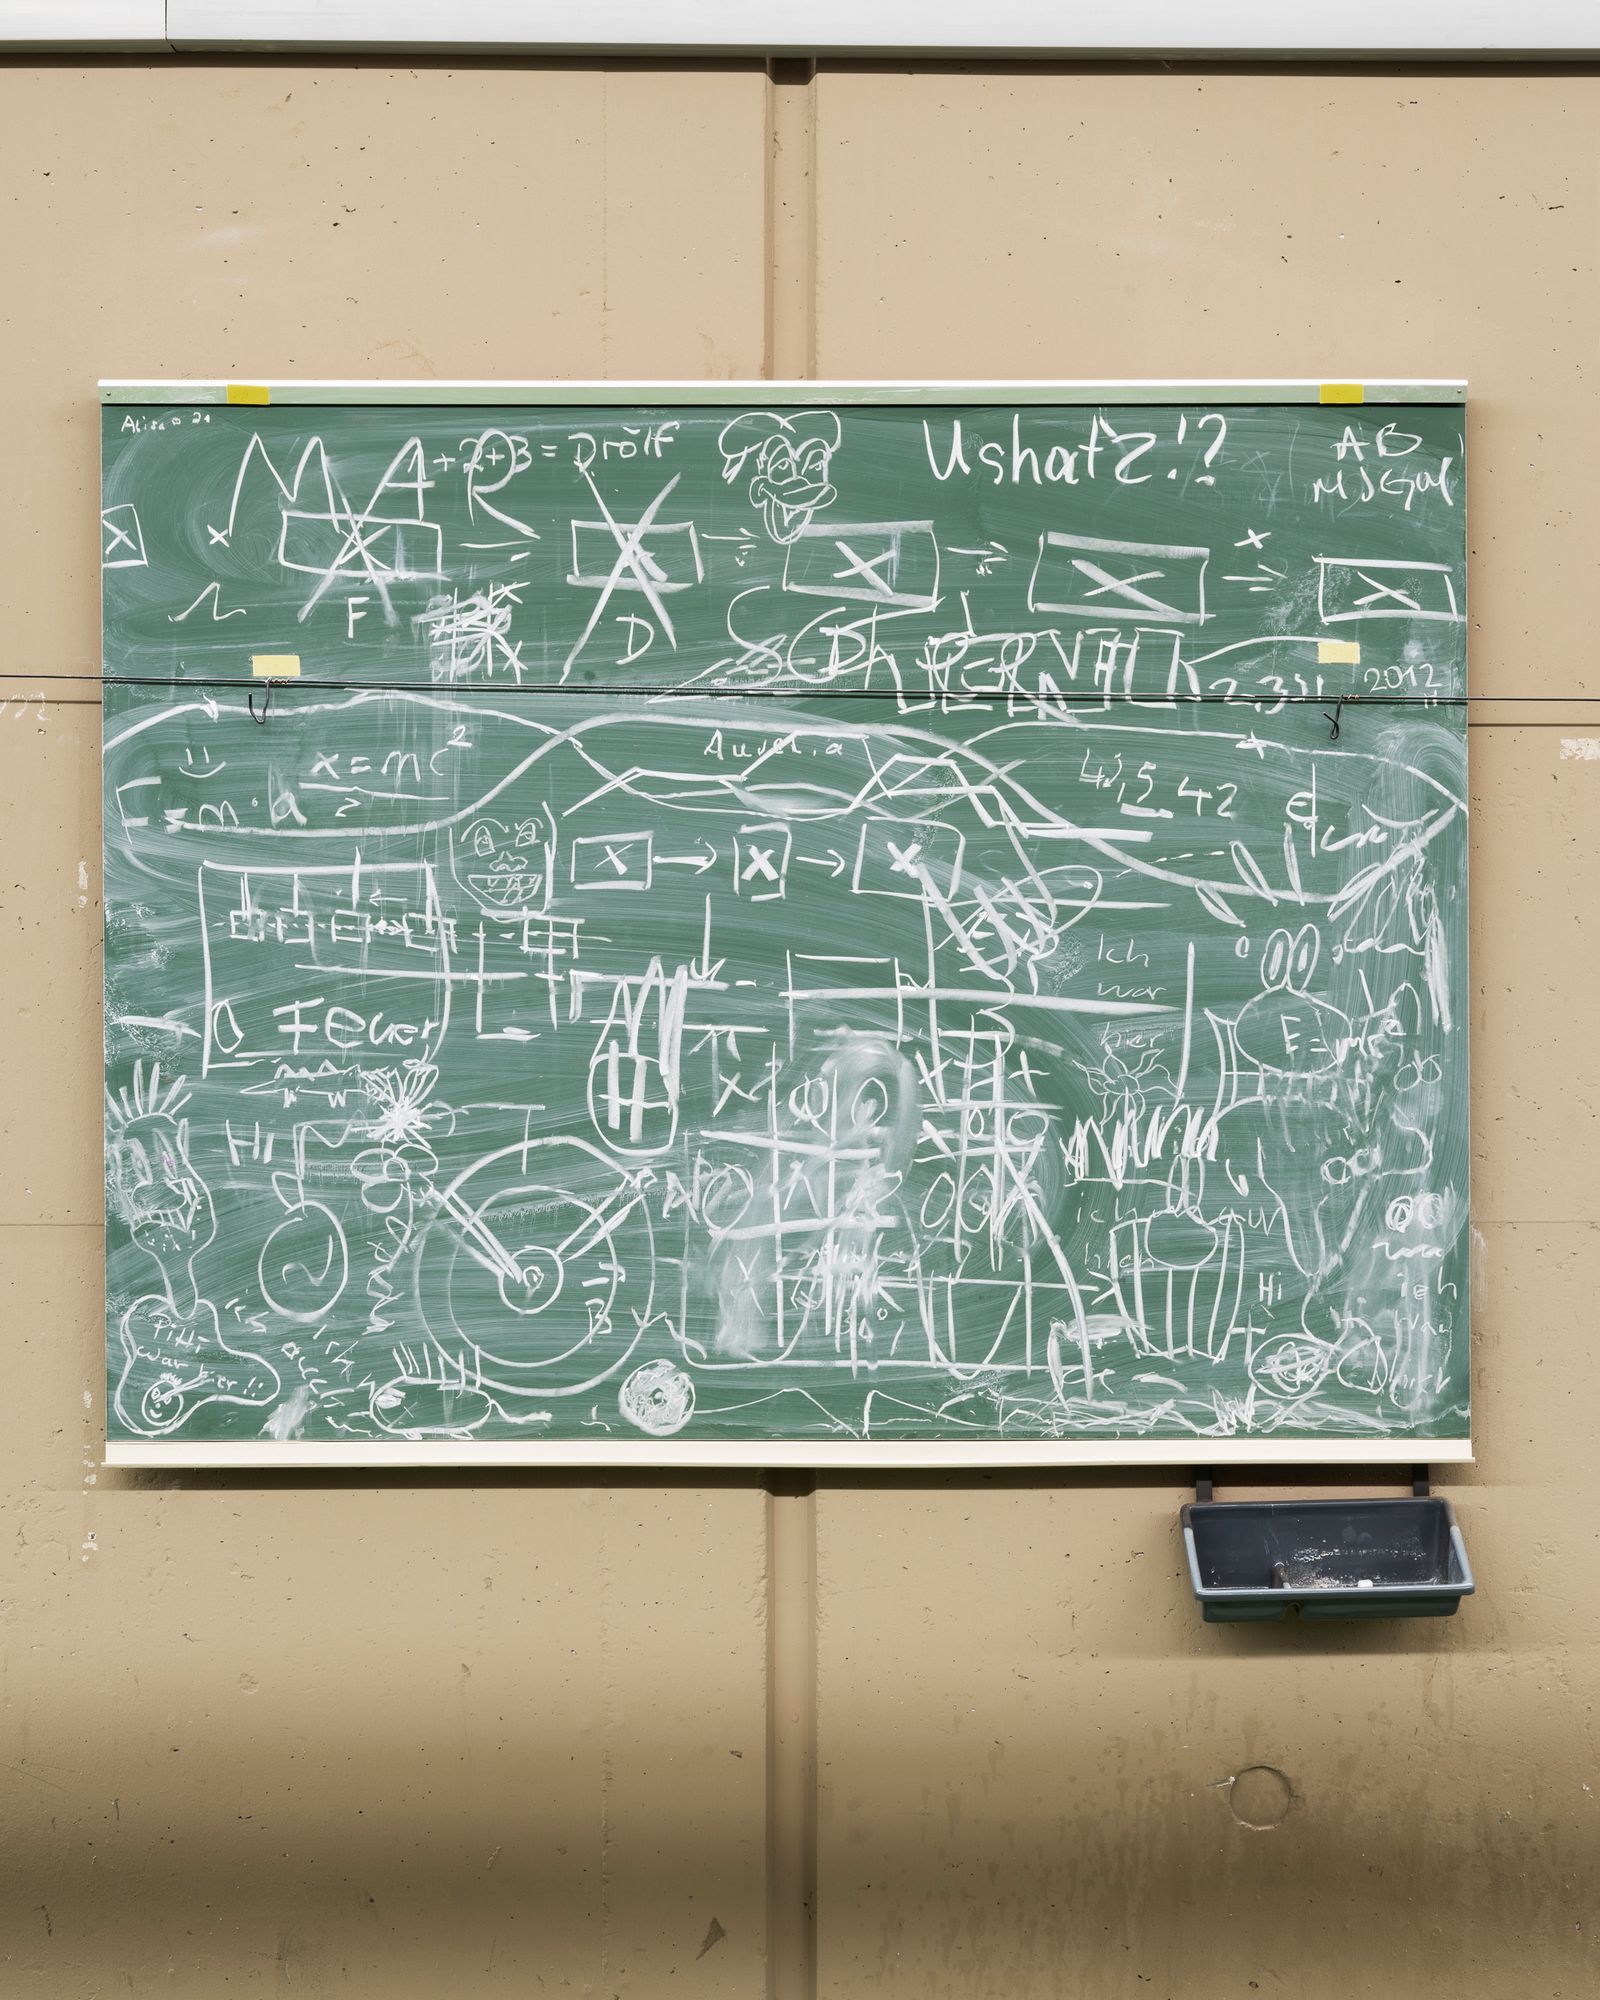 © luca spano - Chalkboard with notes at the Leibniz Institute of Photonic Technology.